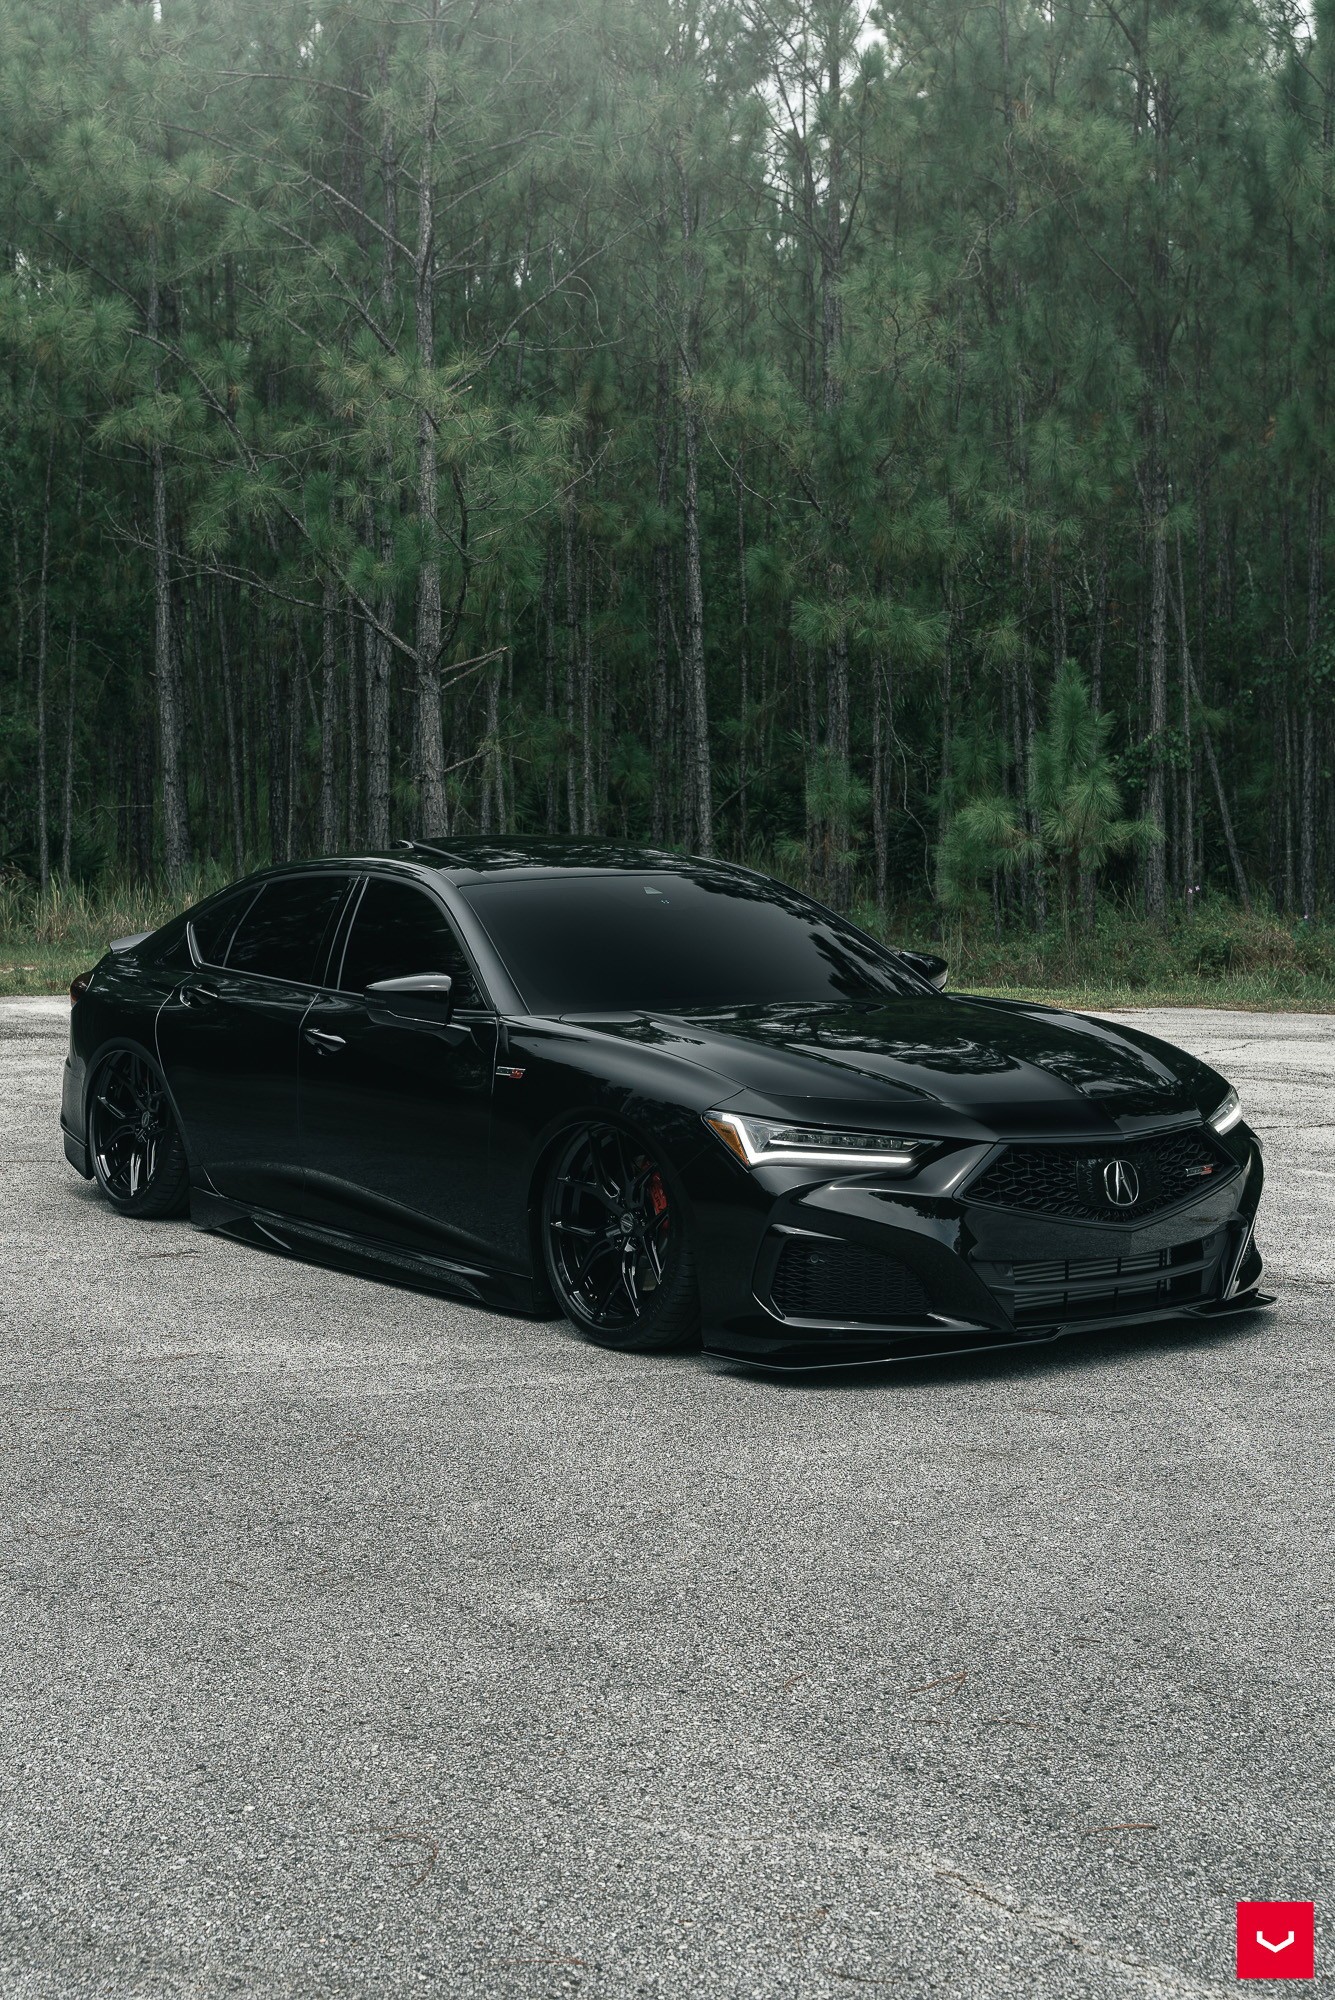 https://s1.cdn.autoevolution.com/images/news/gallery/new-acura-tlx-type-s-is-so-dark-it-looks-like-a-shadow_2.jpg